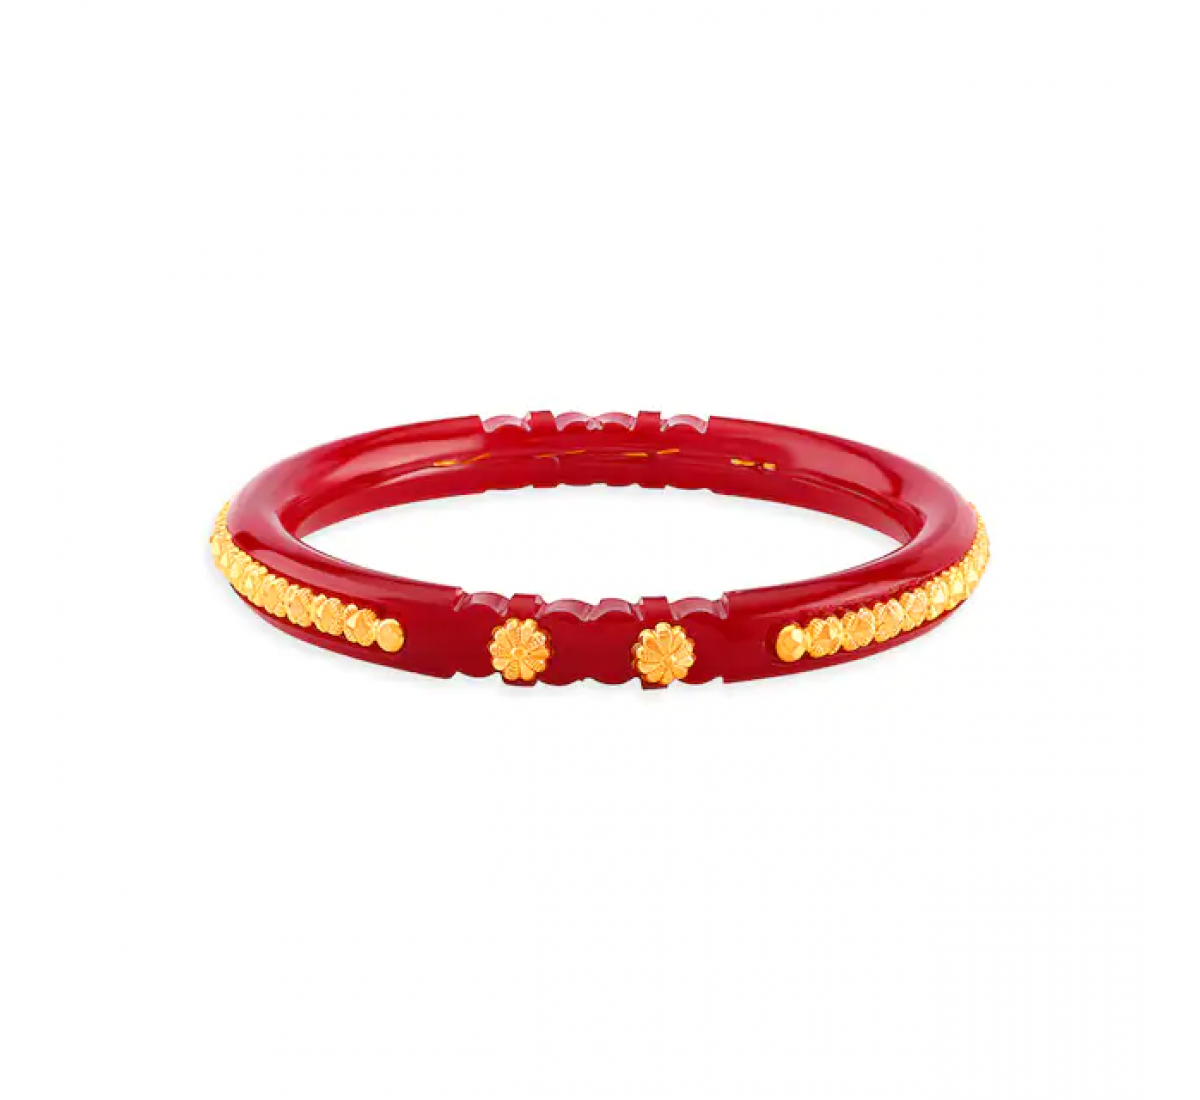 fcity.in - Plastic Gold Plated Shakha Pola Bangles For Women / Princess